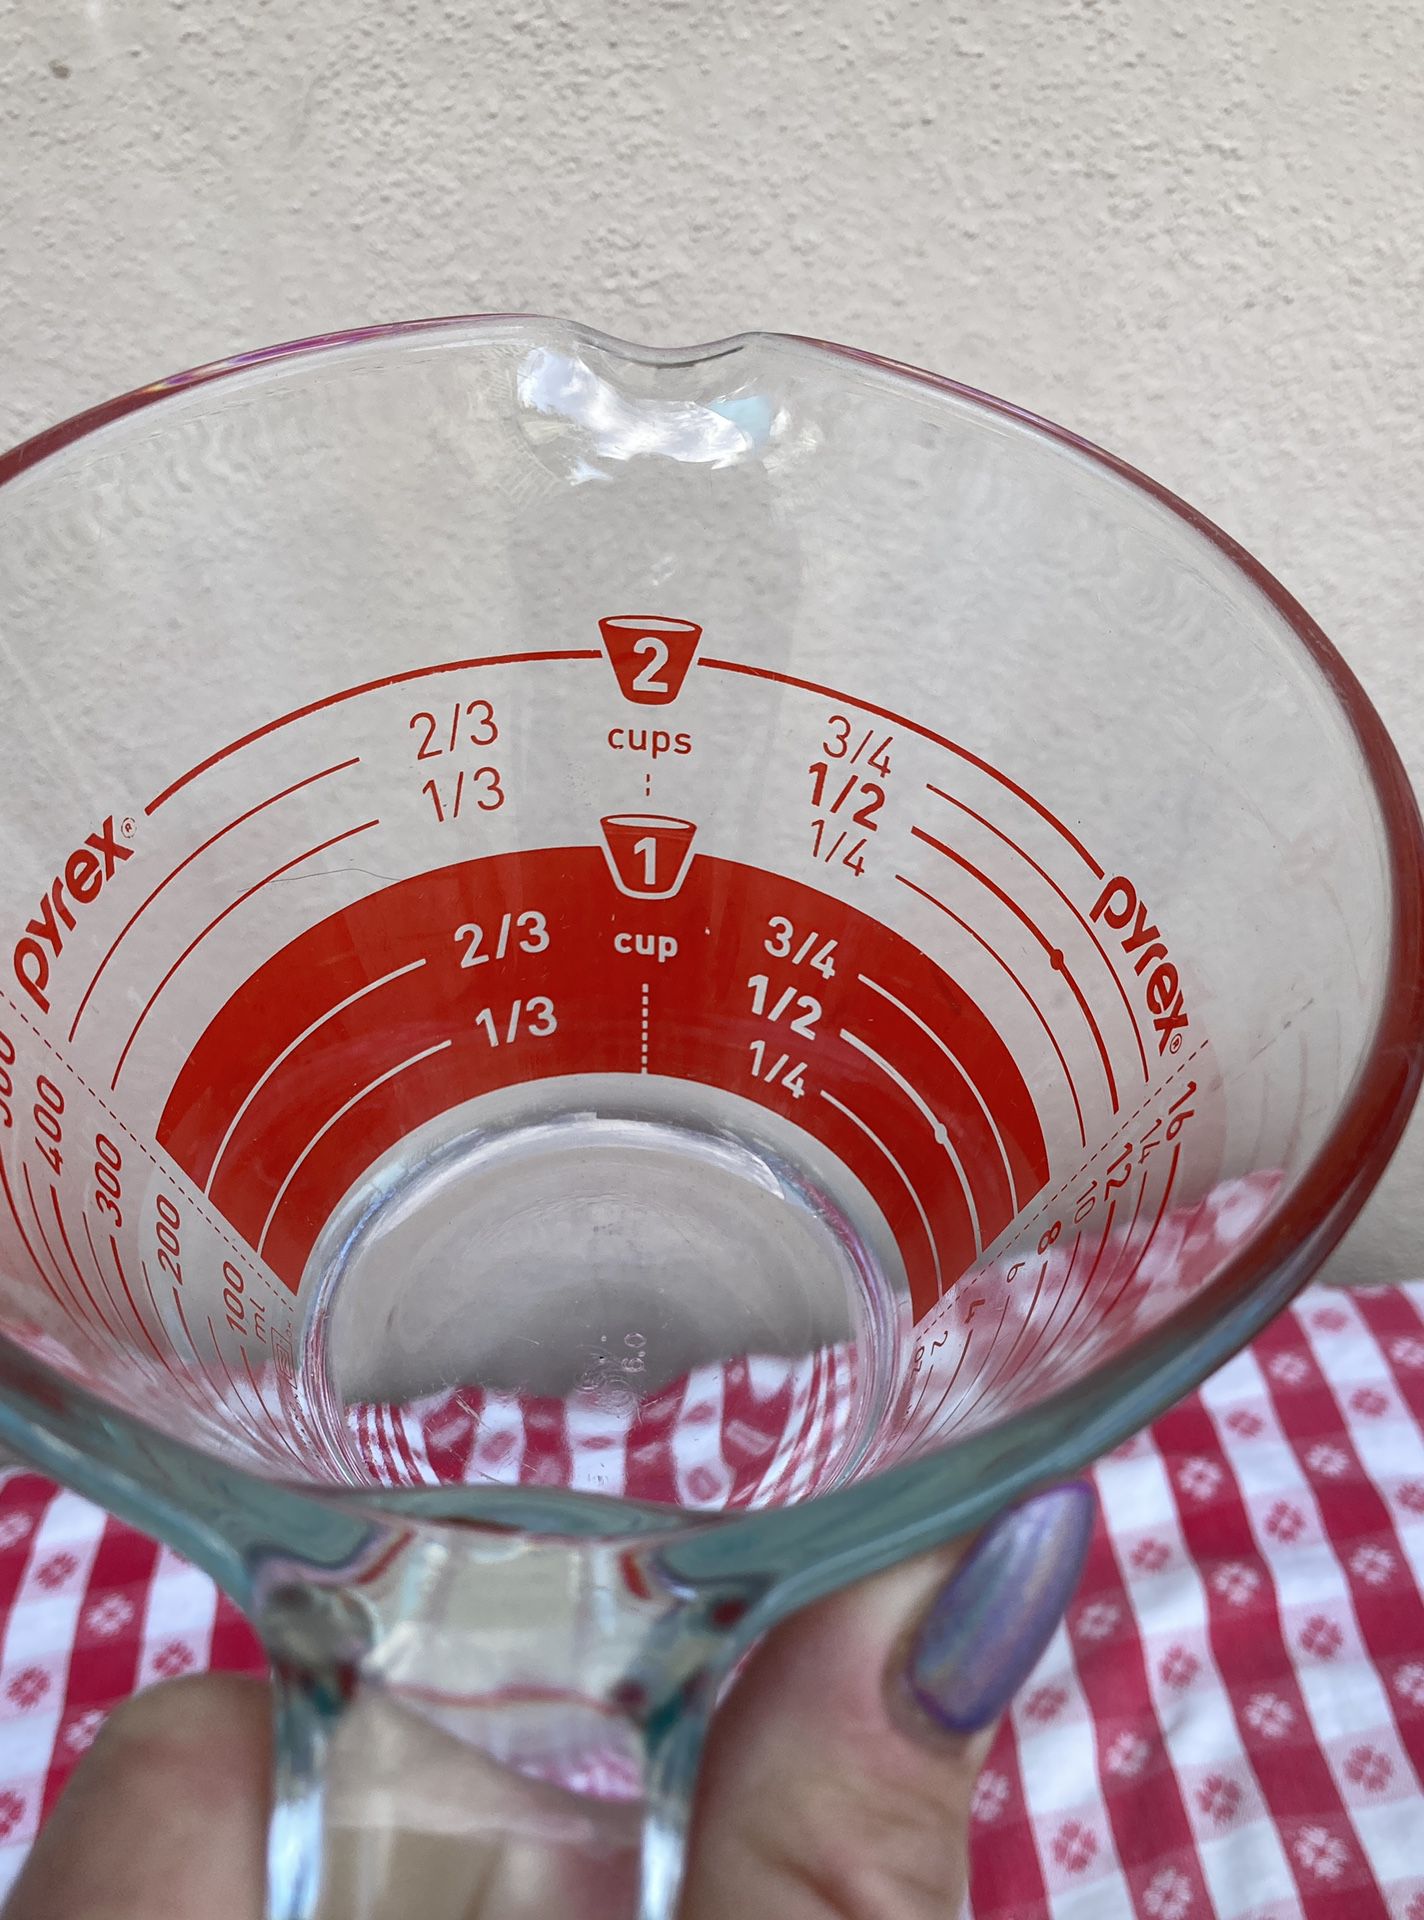 Vintage Pyrex Measuring Cup, 4 Cup/ 32 Ounce Capacity, Bright Red